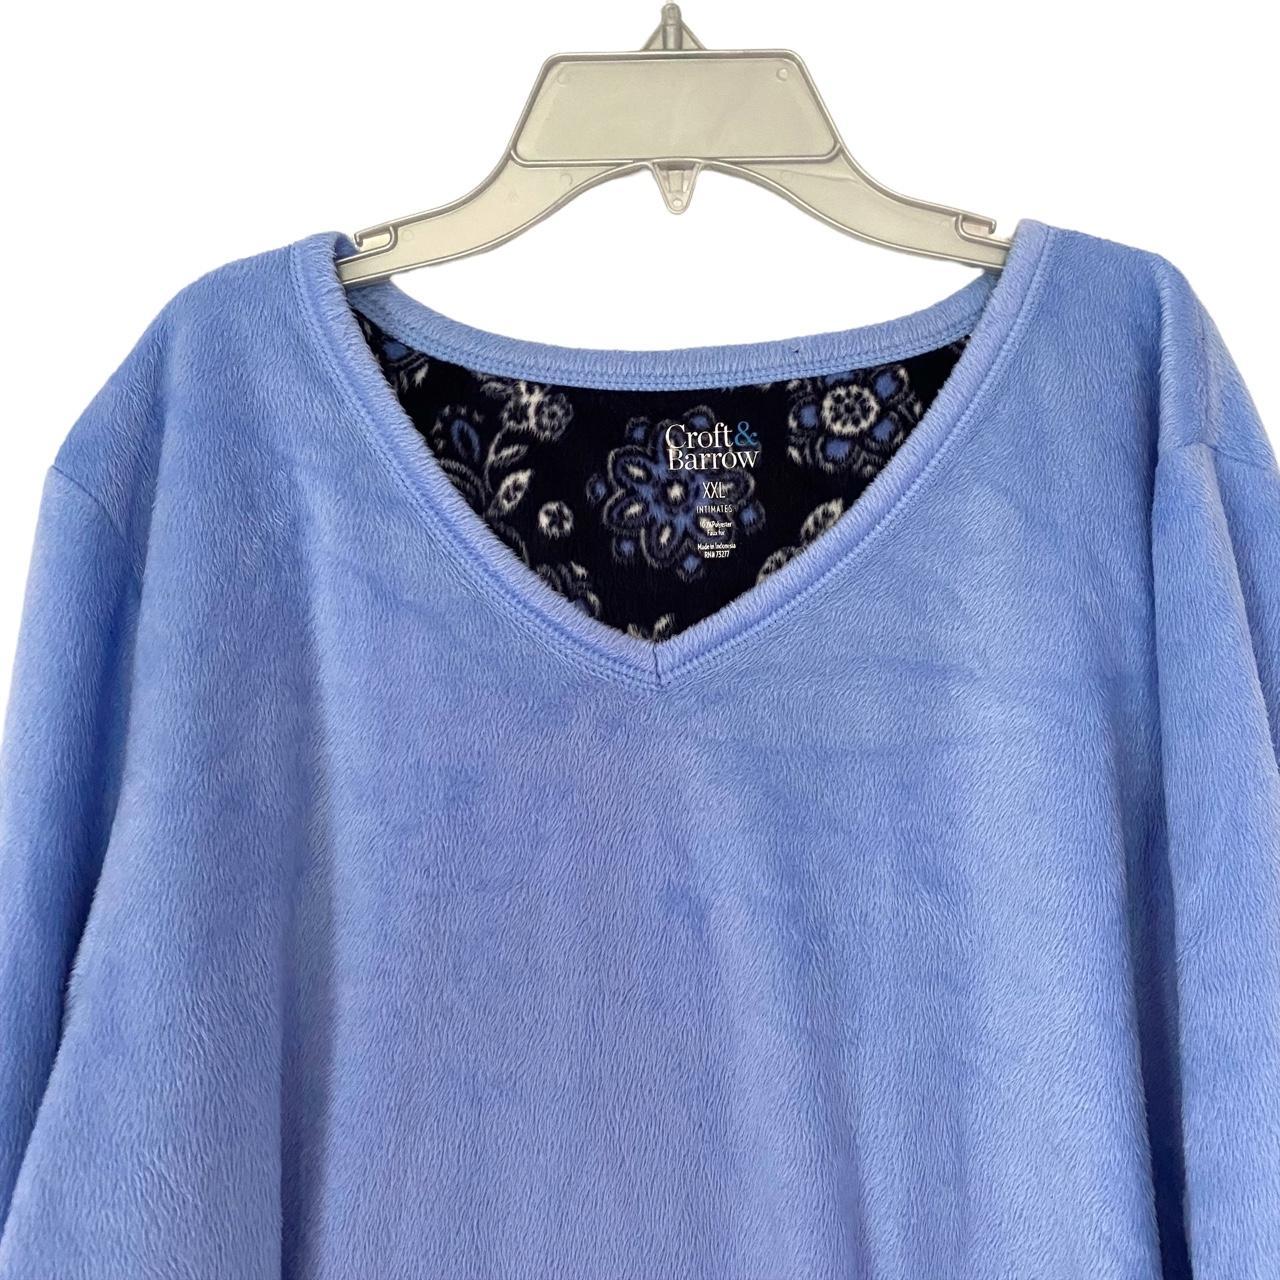 Product Image 3 - This is a top from